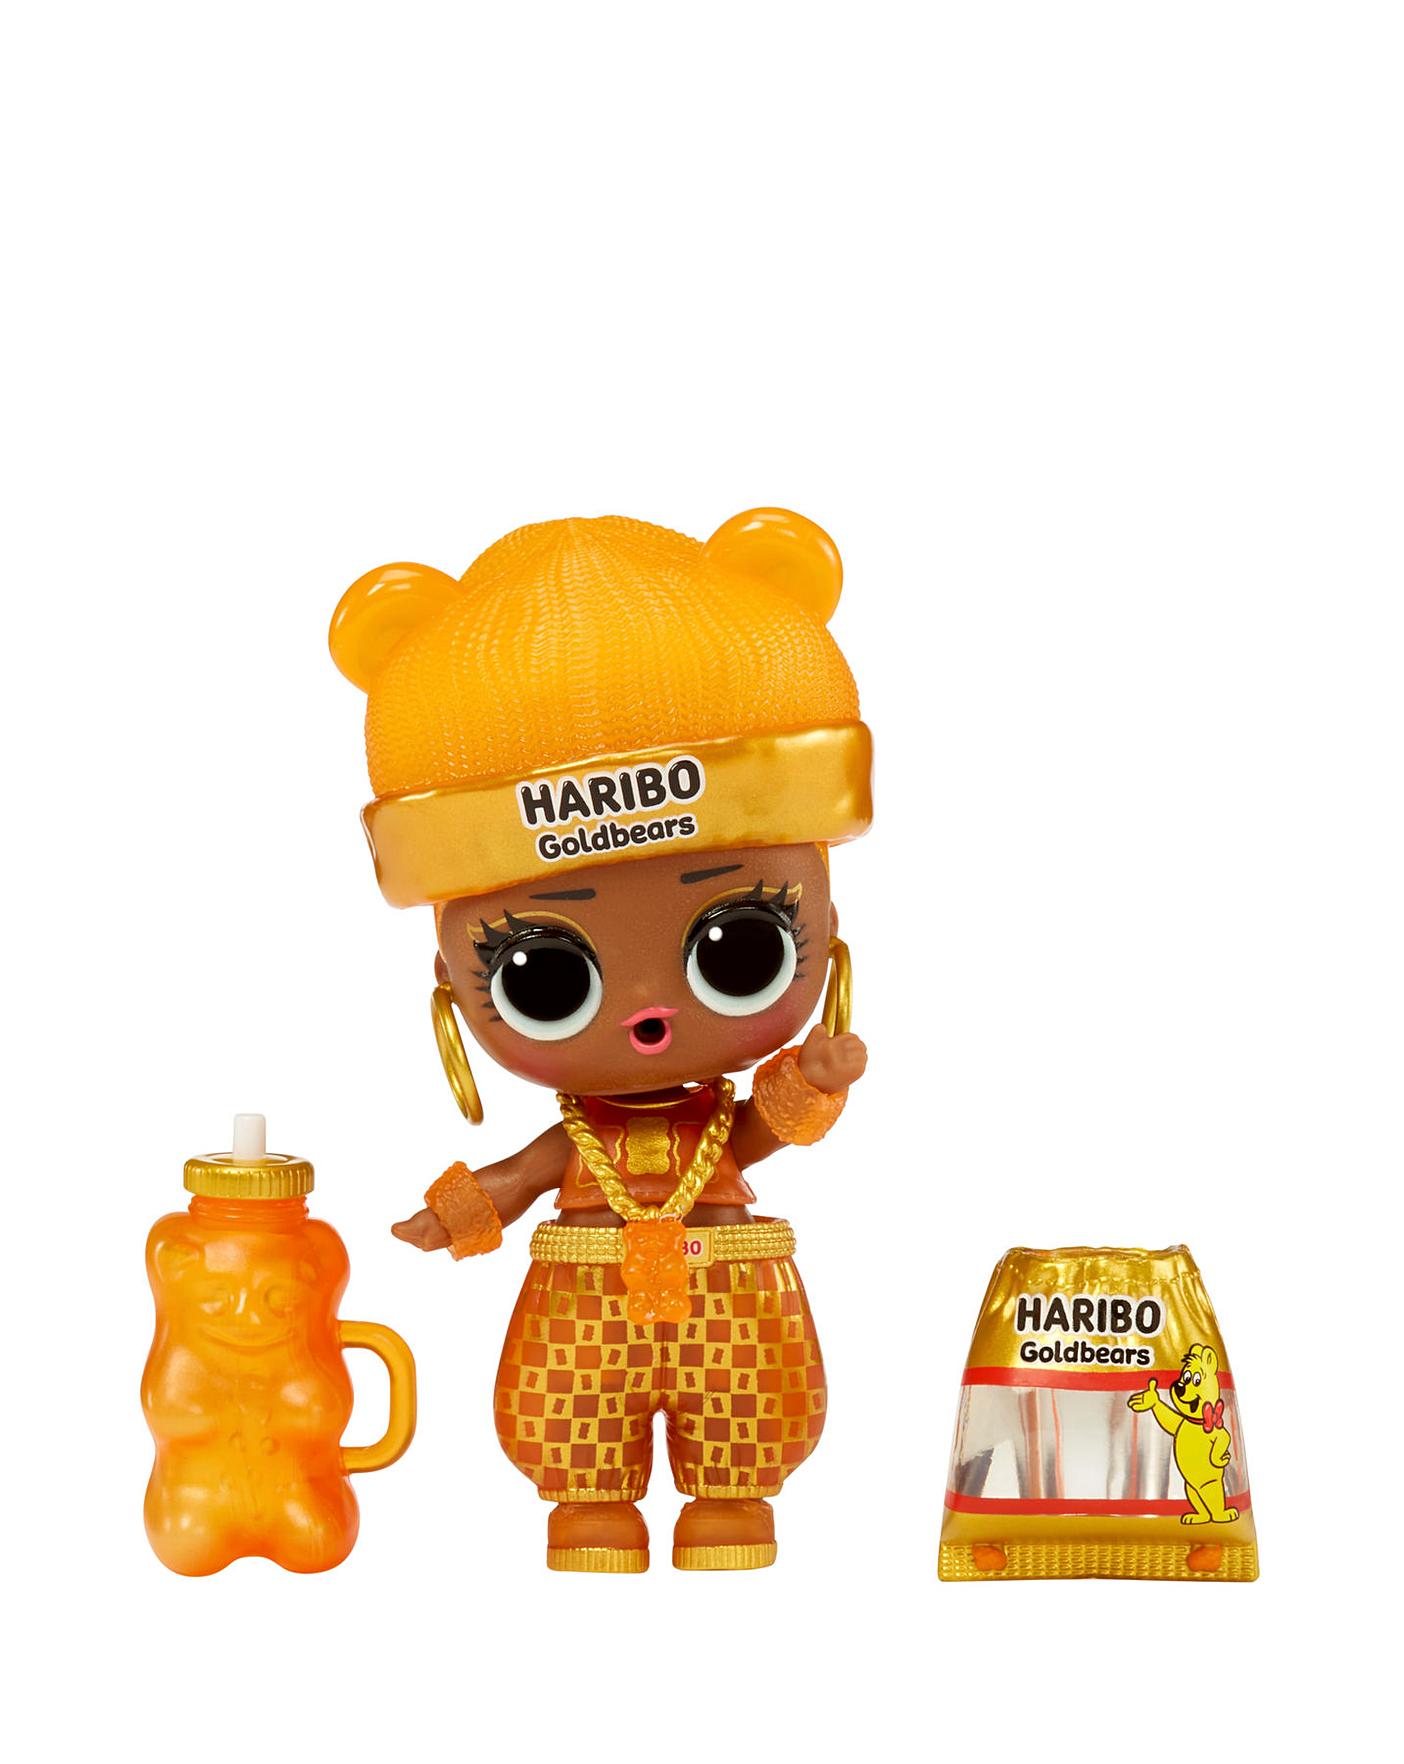 L.O.L. Surprise! Loves Mini Sweets Haribo Party Pack